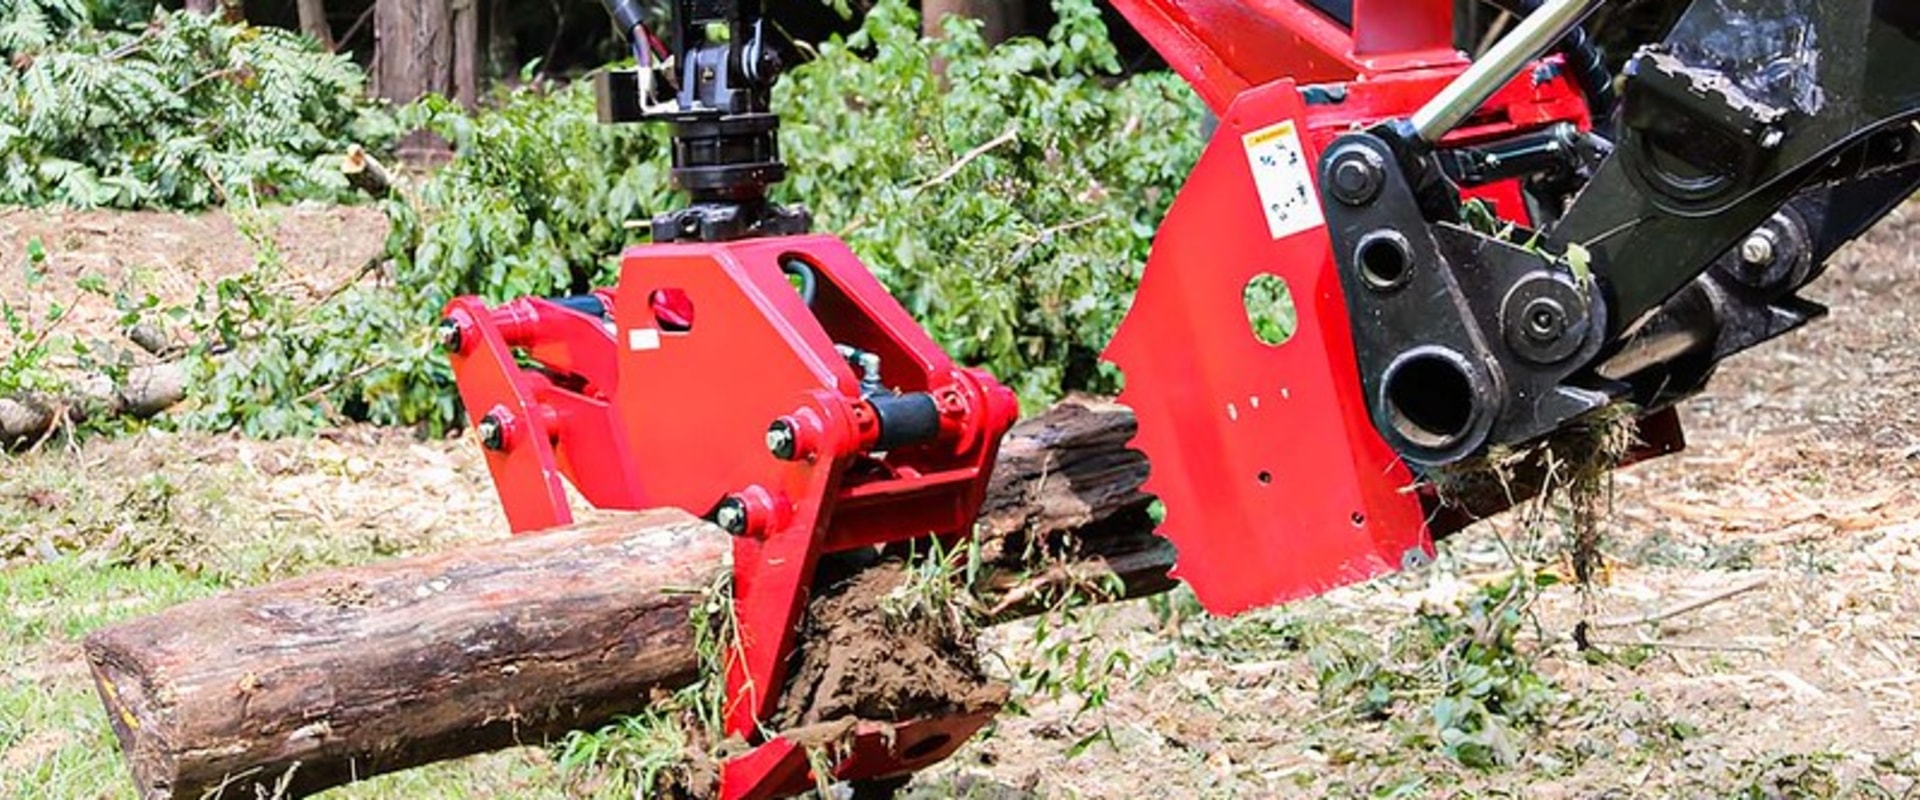 Tree Care: How The Dominator Tree Puller Can Help